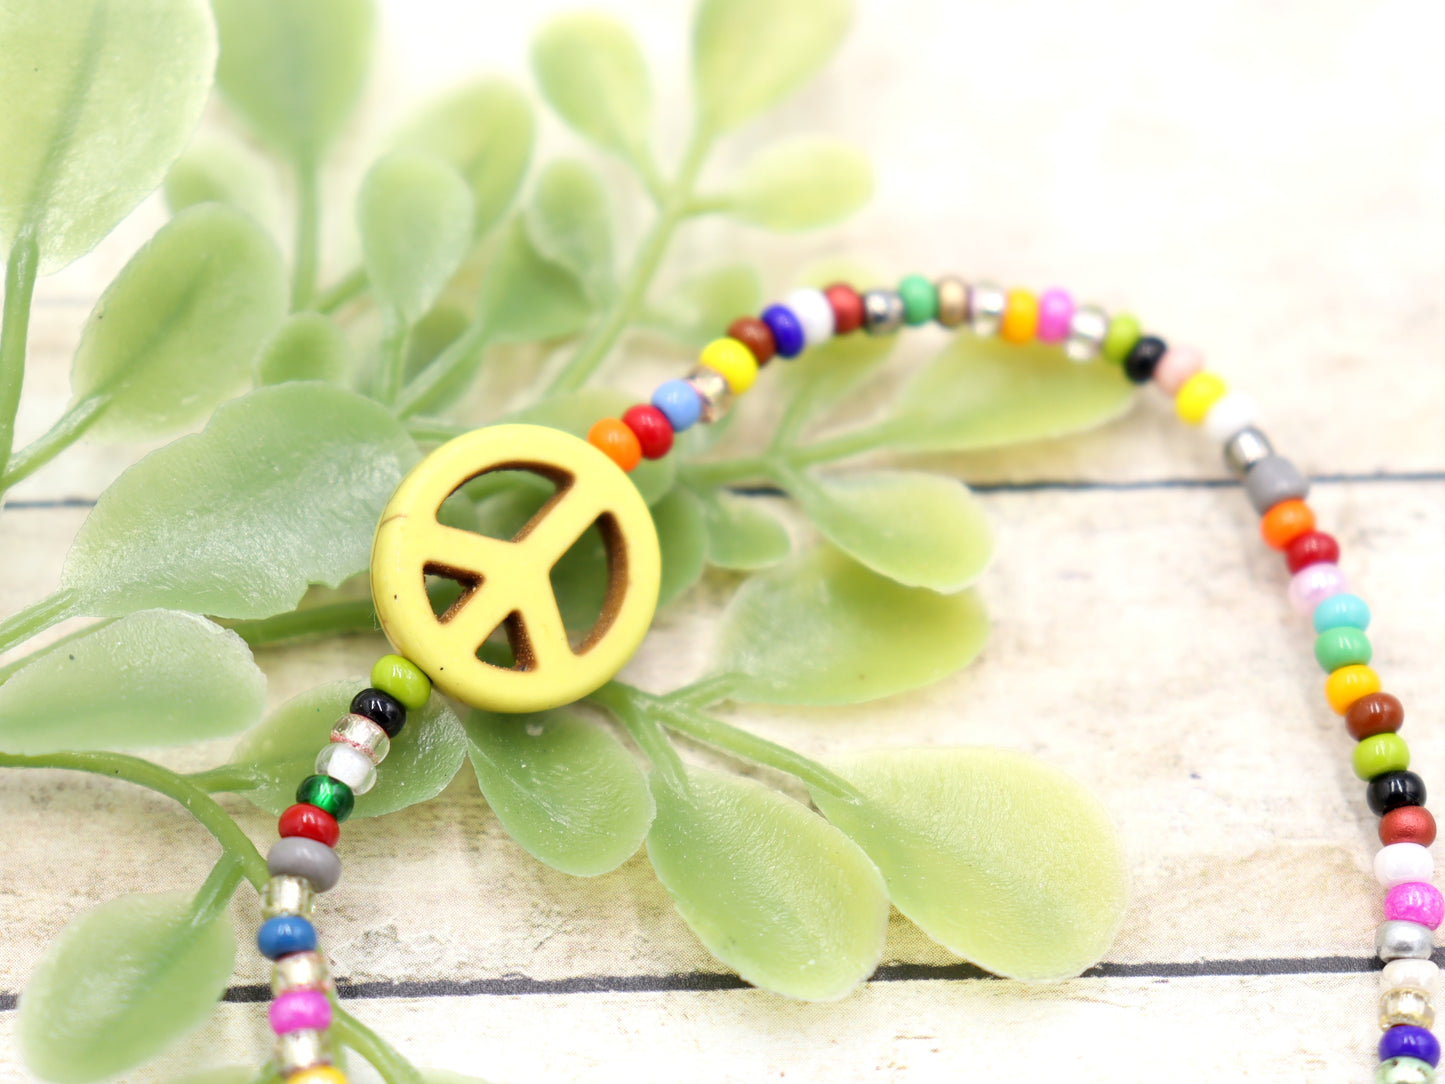 Holler For Howlite Yellow Joy and Peace Be to You Assorted Seed Bead Glass Bracelet by Monkey's Mojo